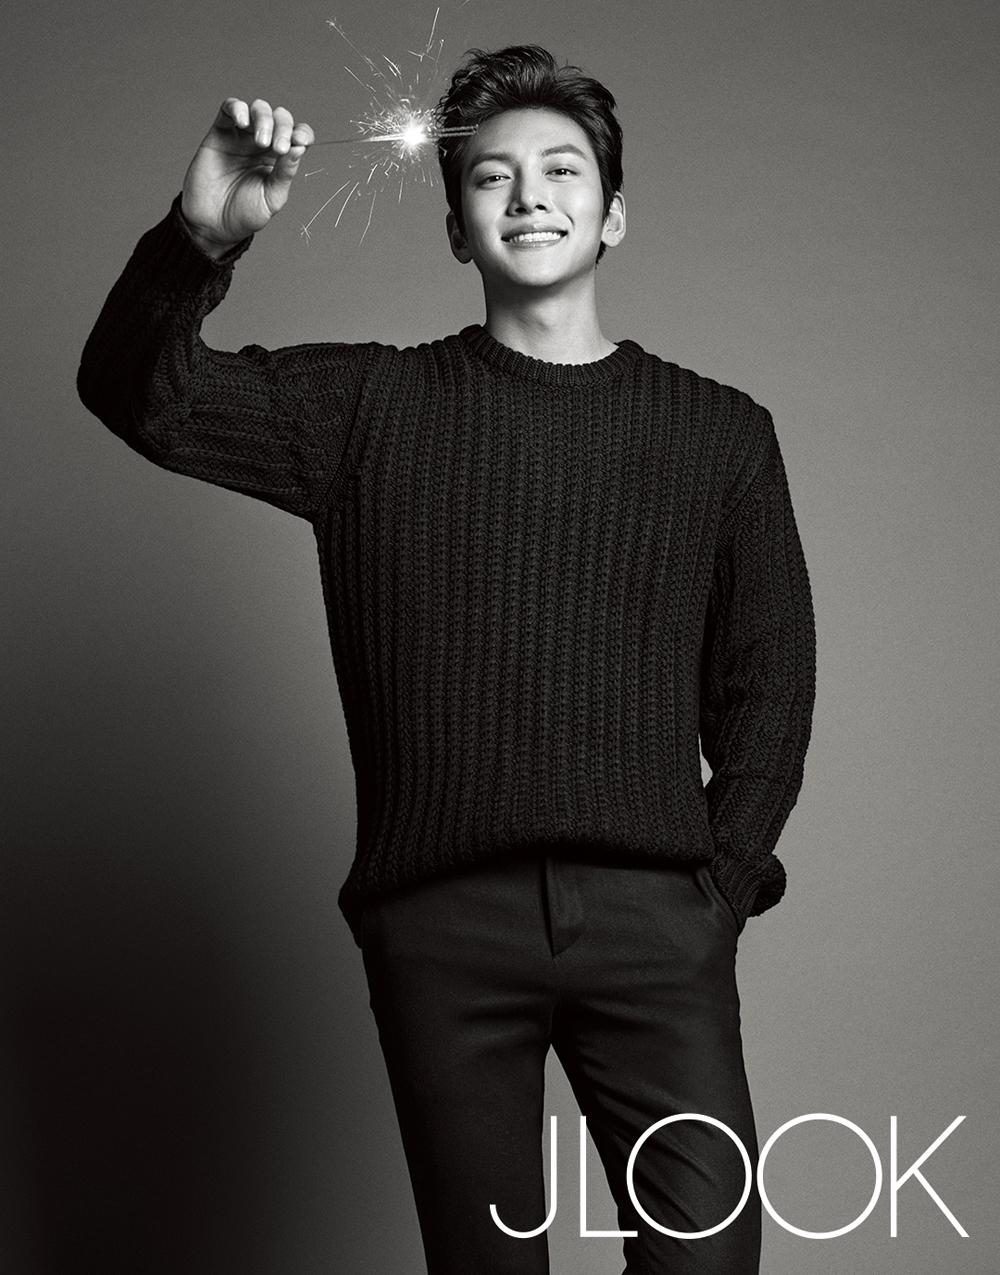 Ji Chang Wook Talks About “The K2” And More With JLOOK